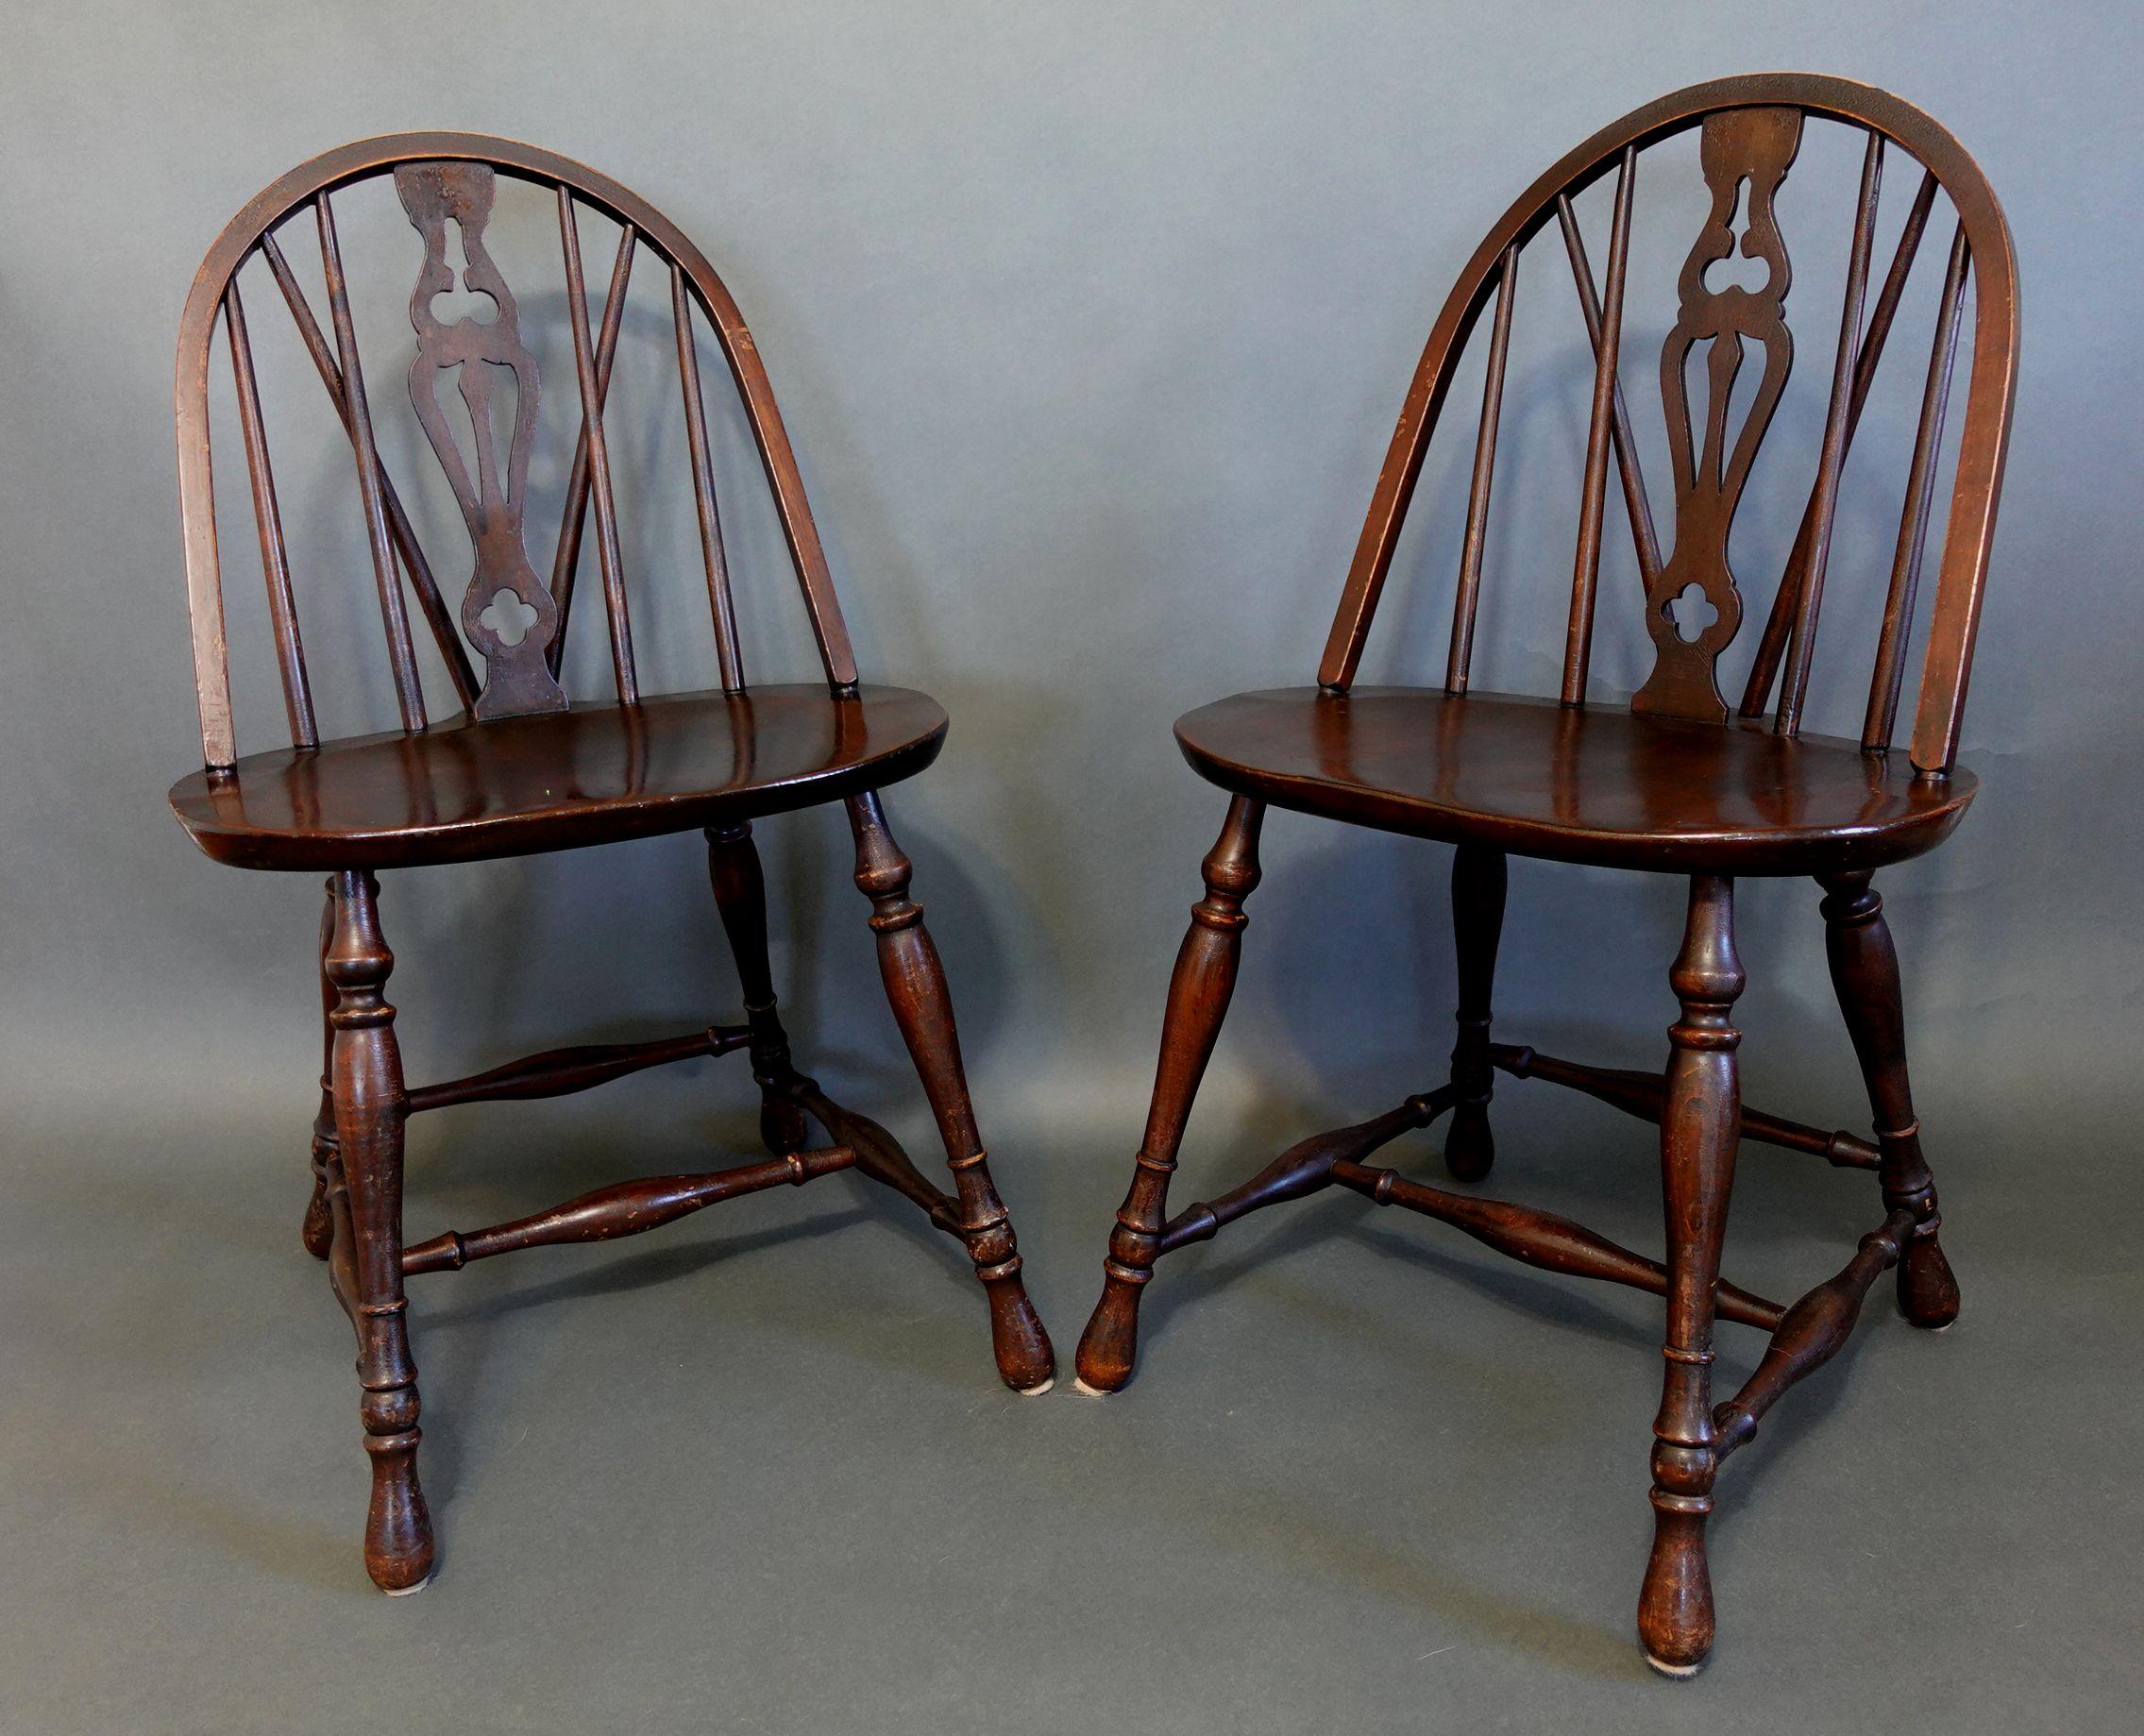 Adorable antique pair of Windsor bow-brace back dining chairs with a decorative splat and finely turned legs and stretcher, in ash with coordinated host and Hostess chairs with rushed seating details.